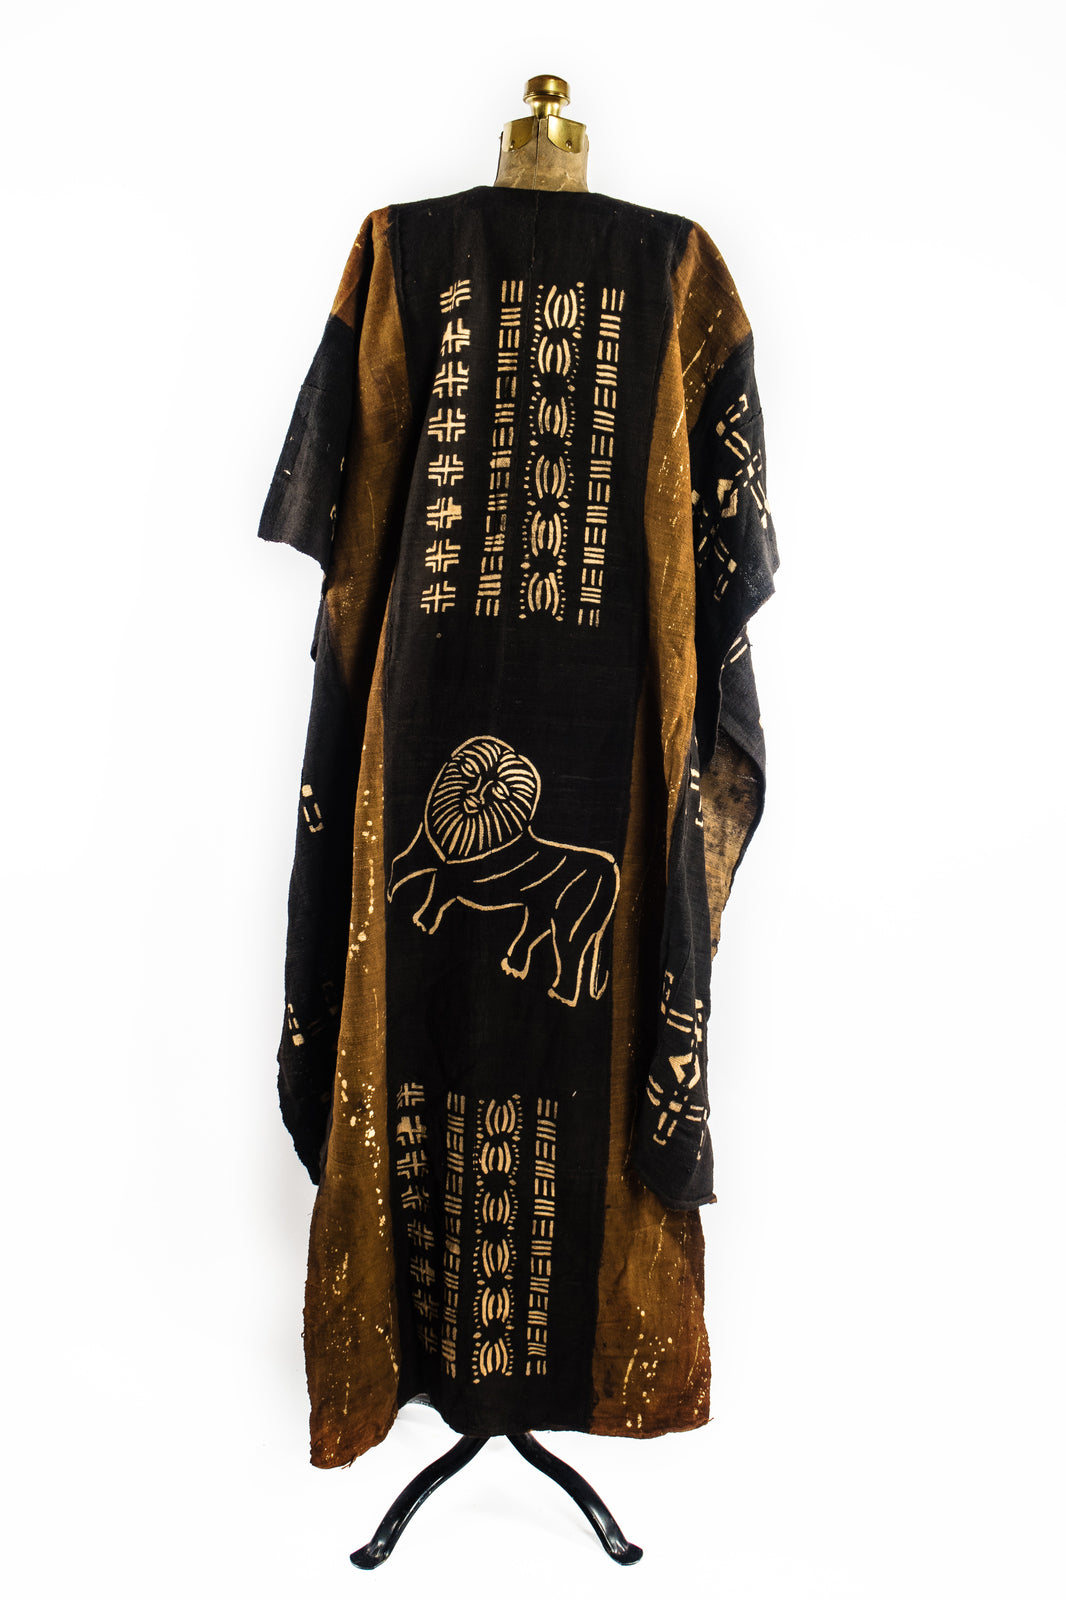 Handcrafted Mudcloth Clothing - Handmade - African Art - Dyed Black Brown - Mudcloth Poncho - Artisanal Traditional Methods - Cotton Bogolan Fabric - One - Of - A - Kind - Exotic -Eye Catching - Large Size - Men Women